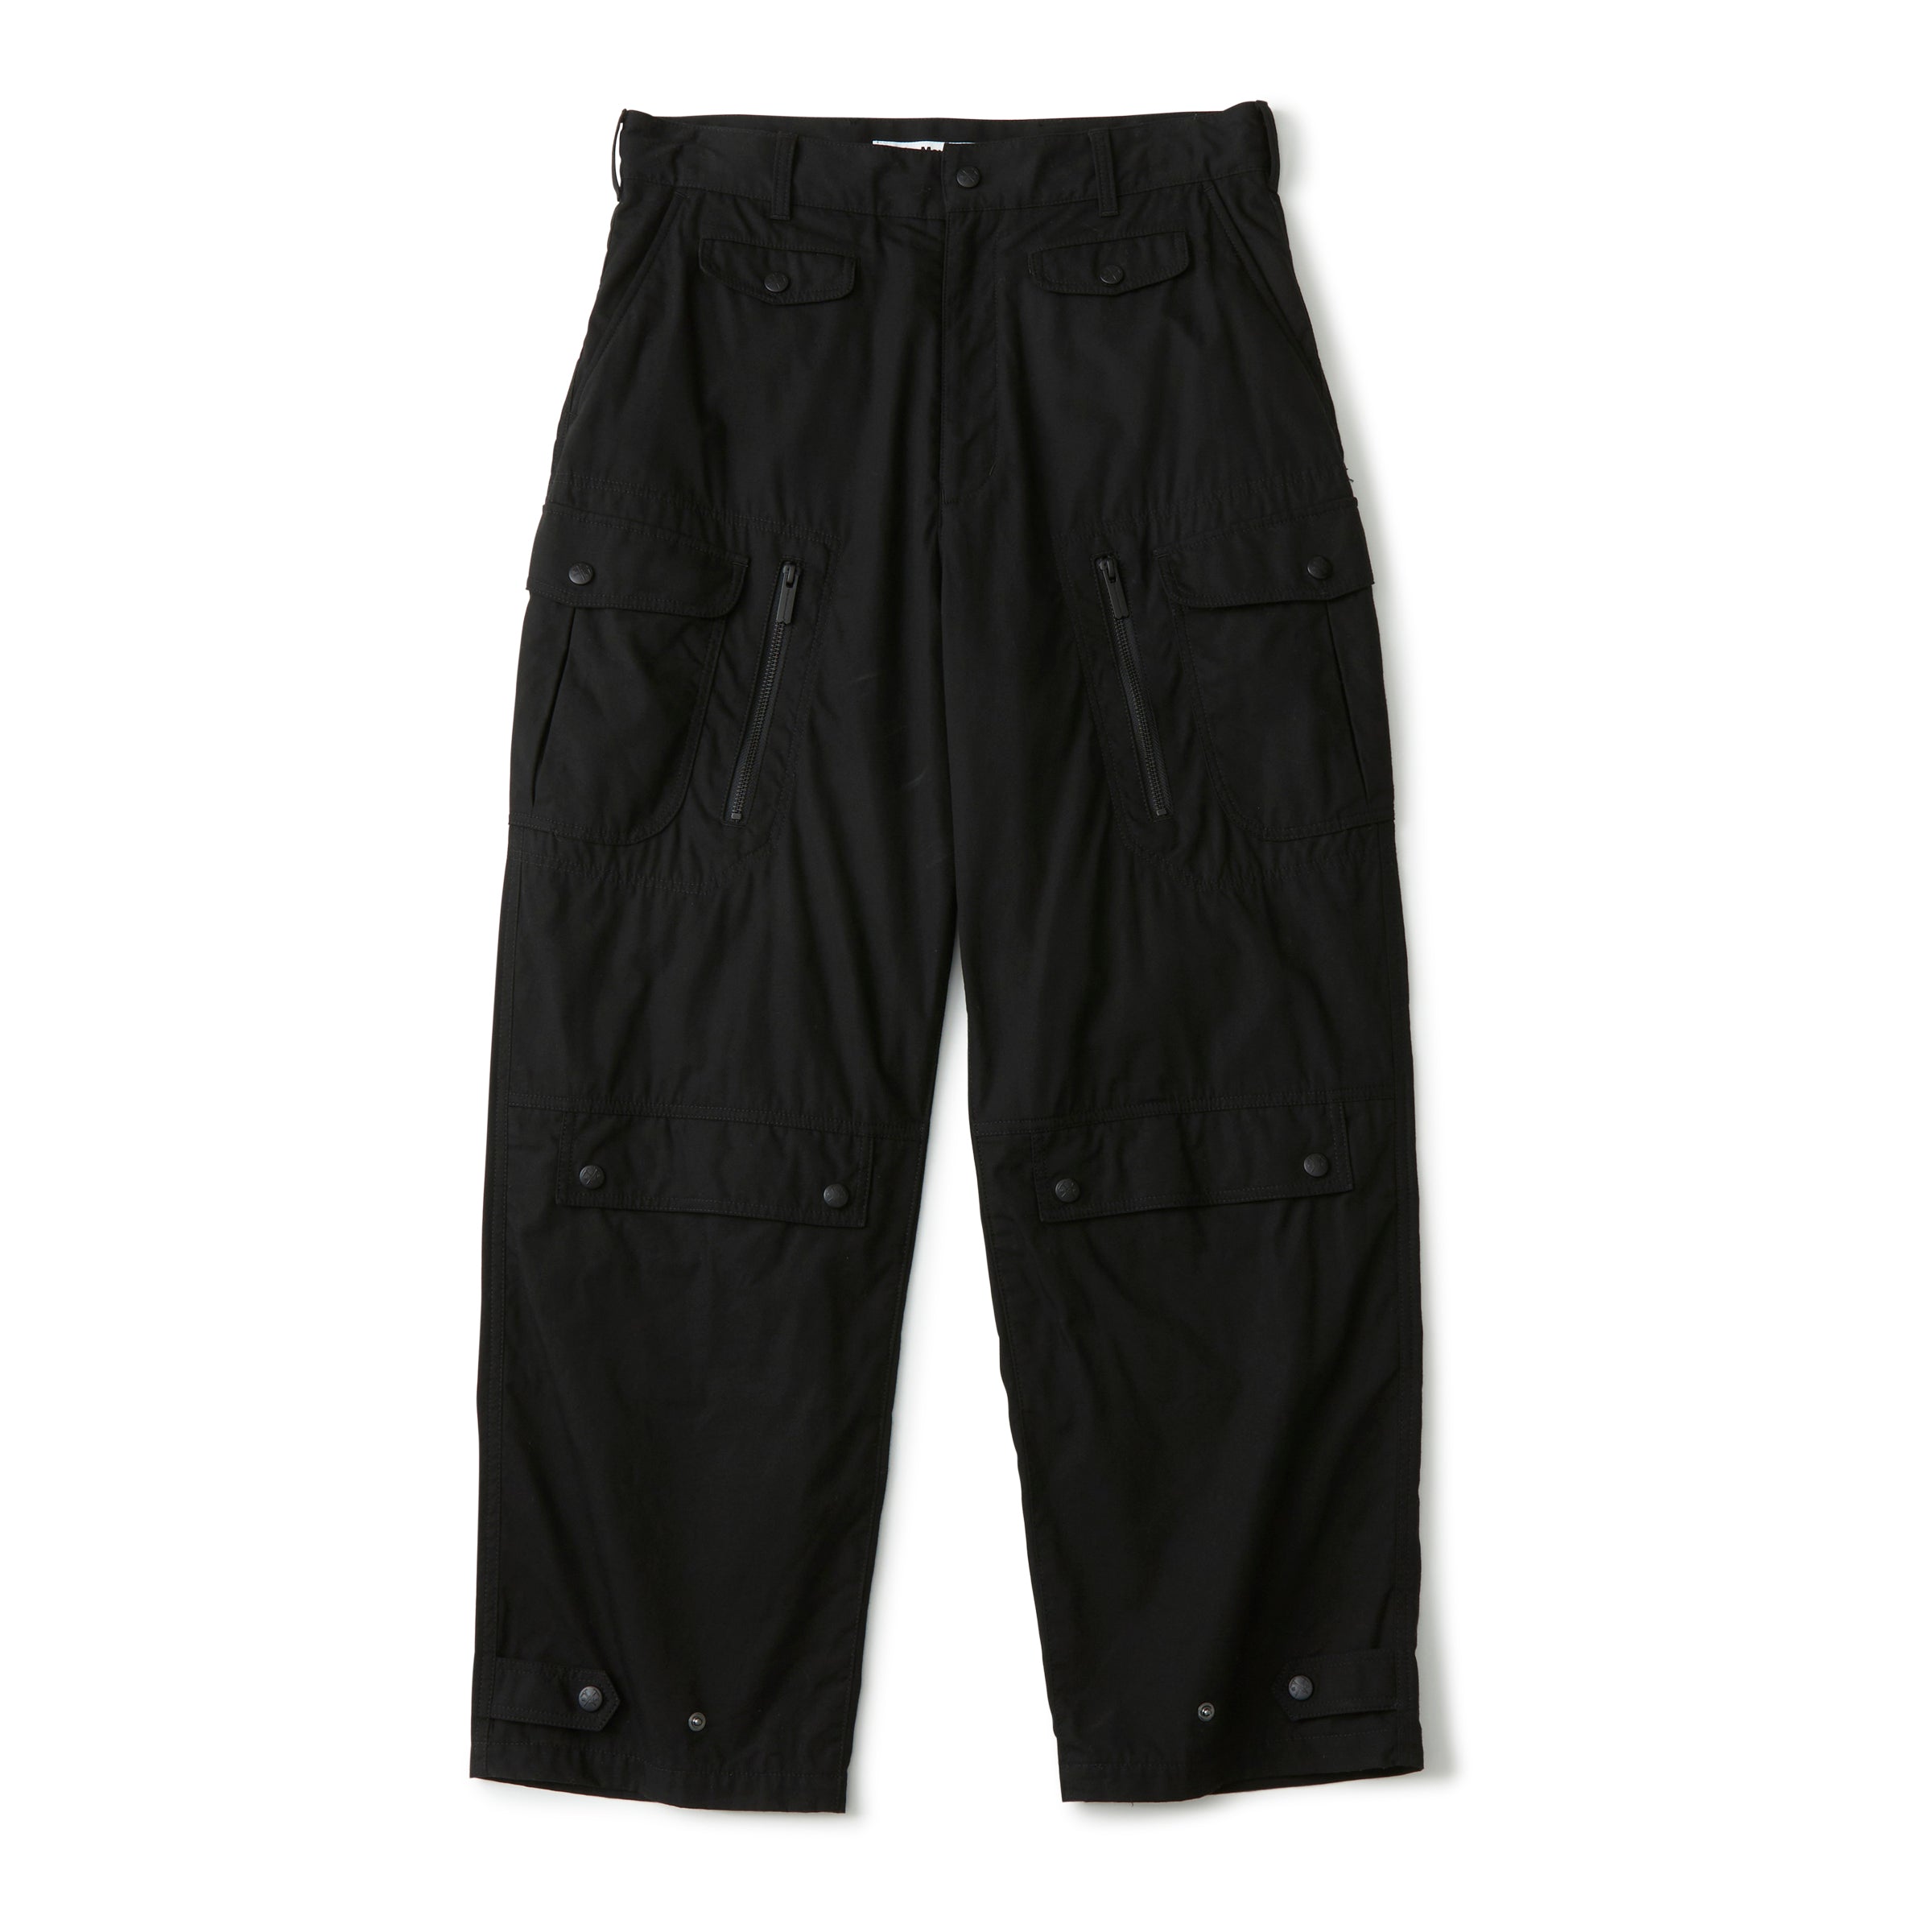 CARGO PANTS – White Mountaineering OFFICIAL WEB SITE.